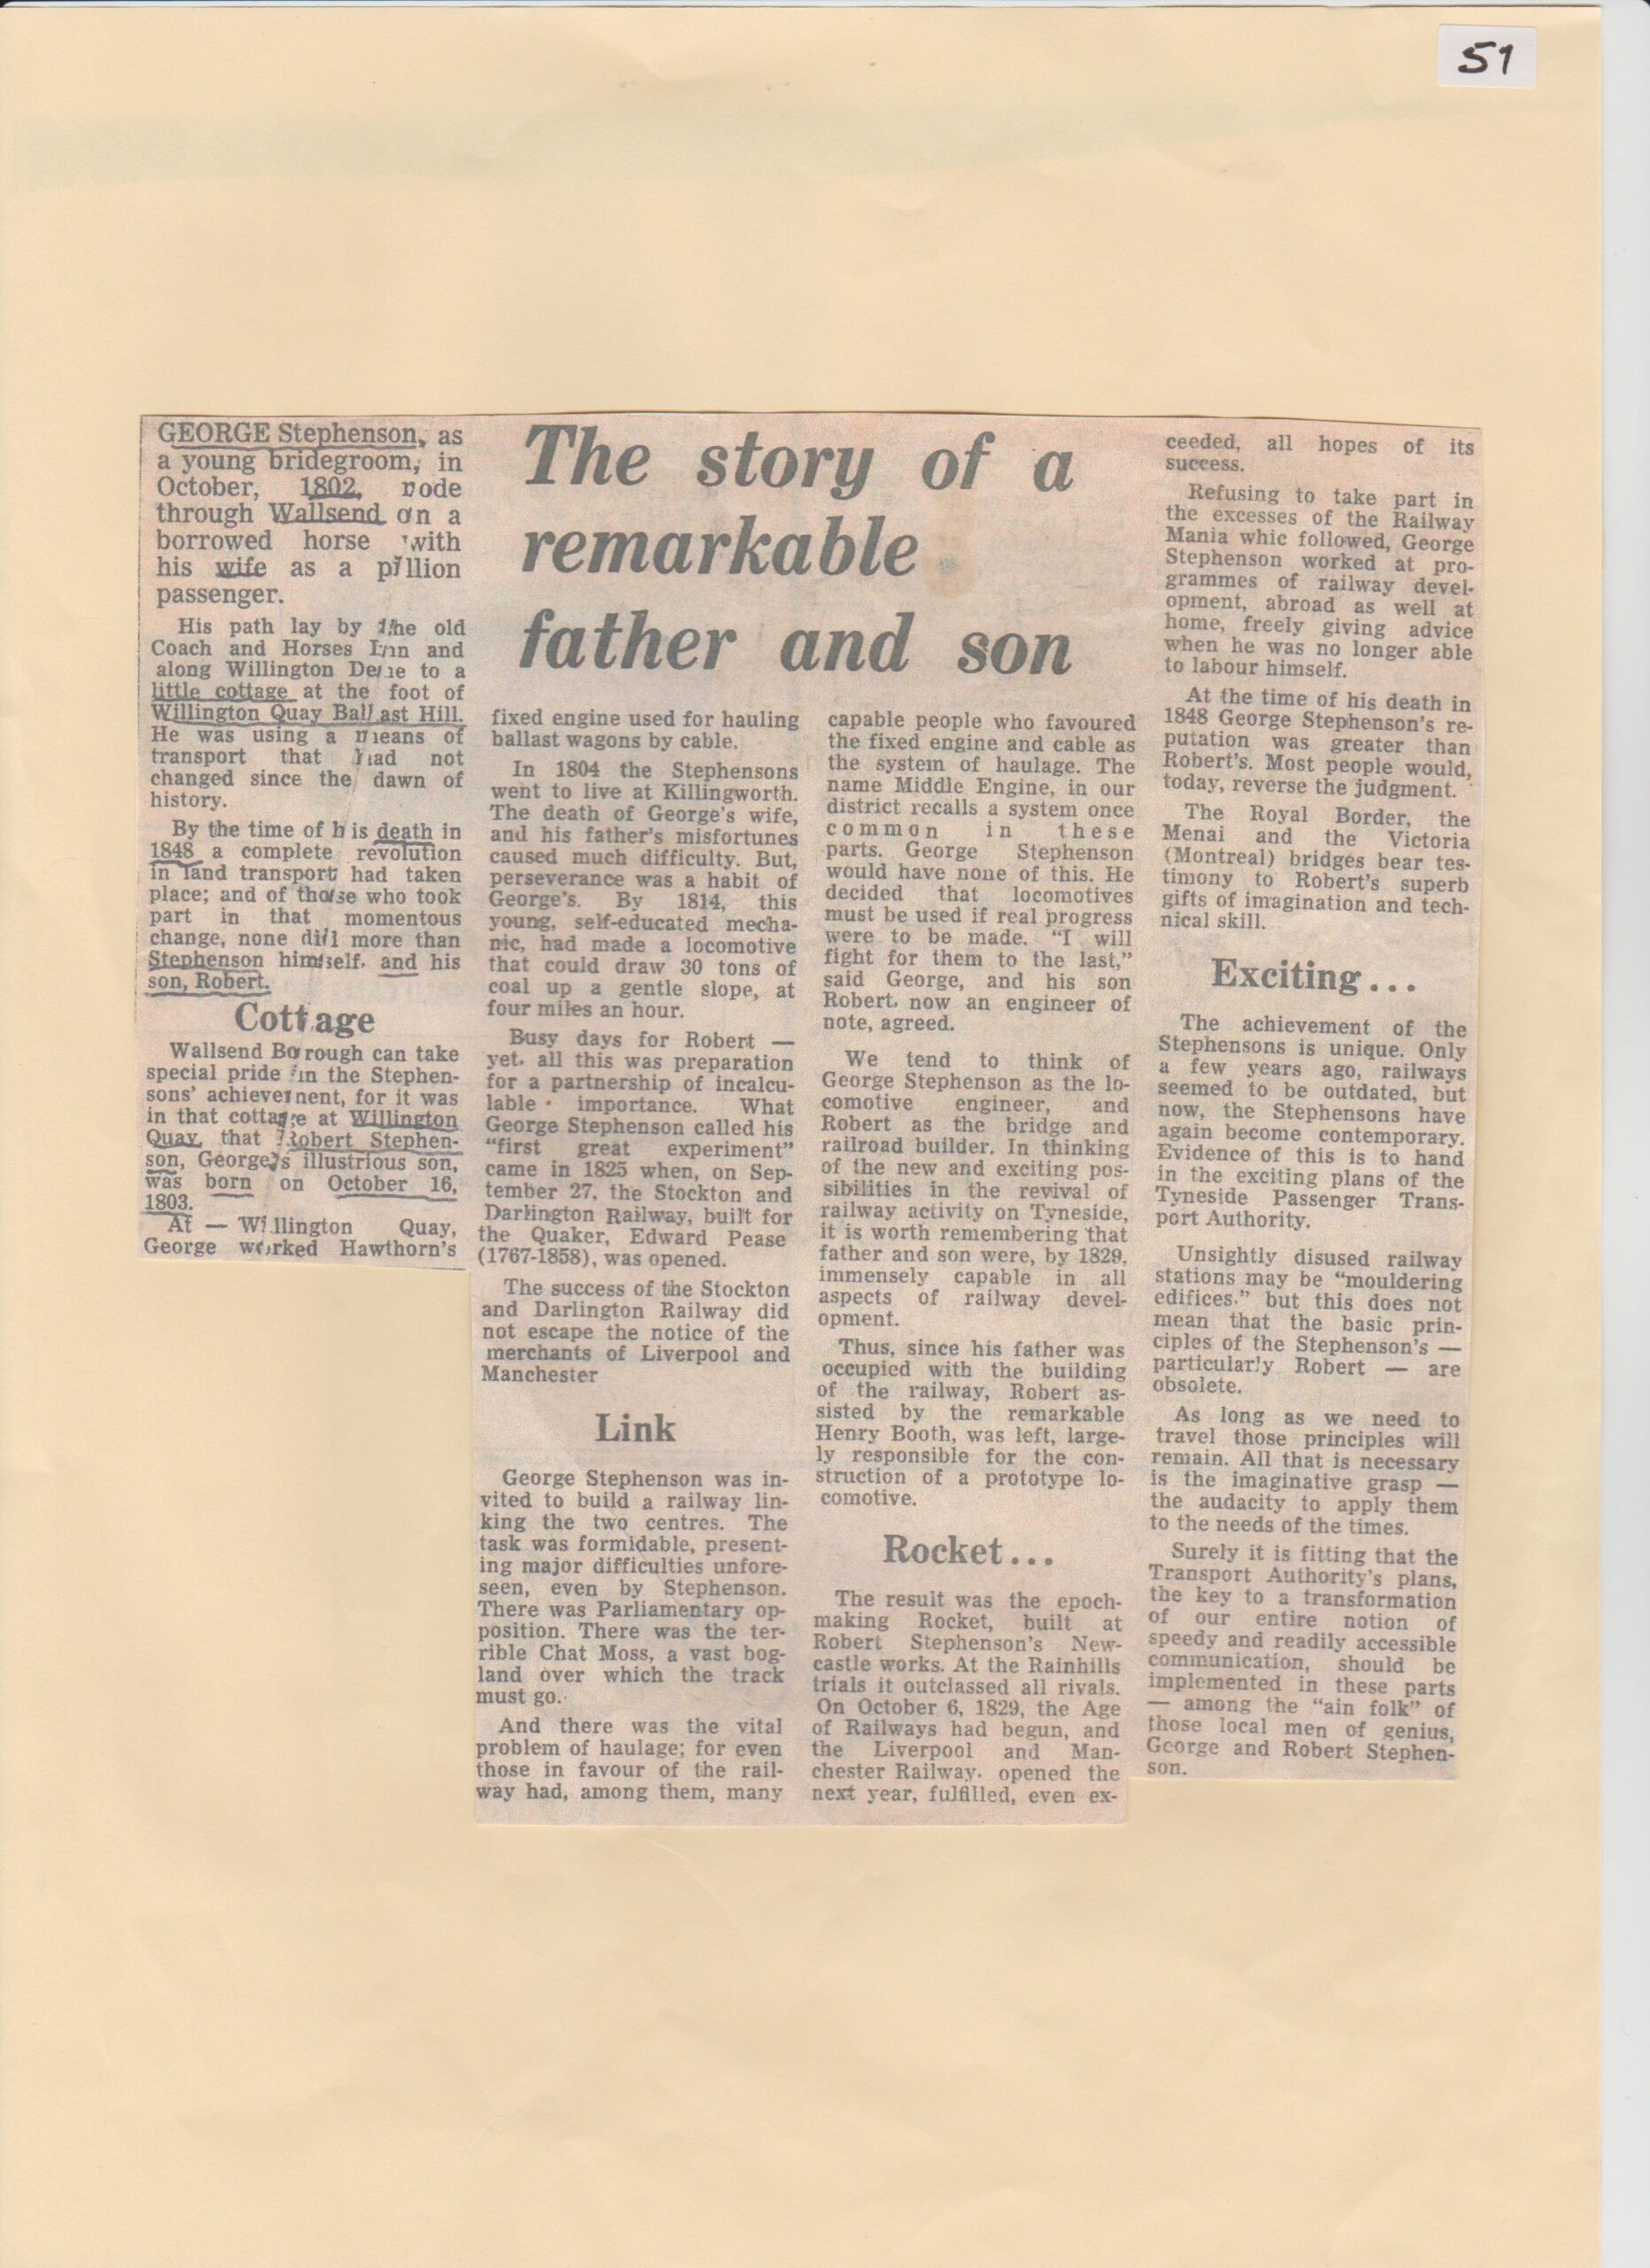 Story of remarkable Stepenson Father _ Son